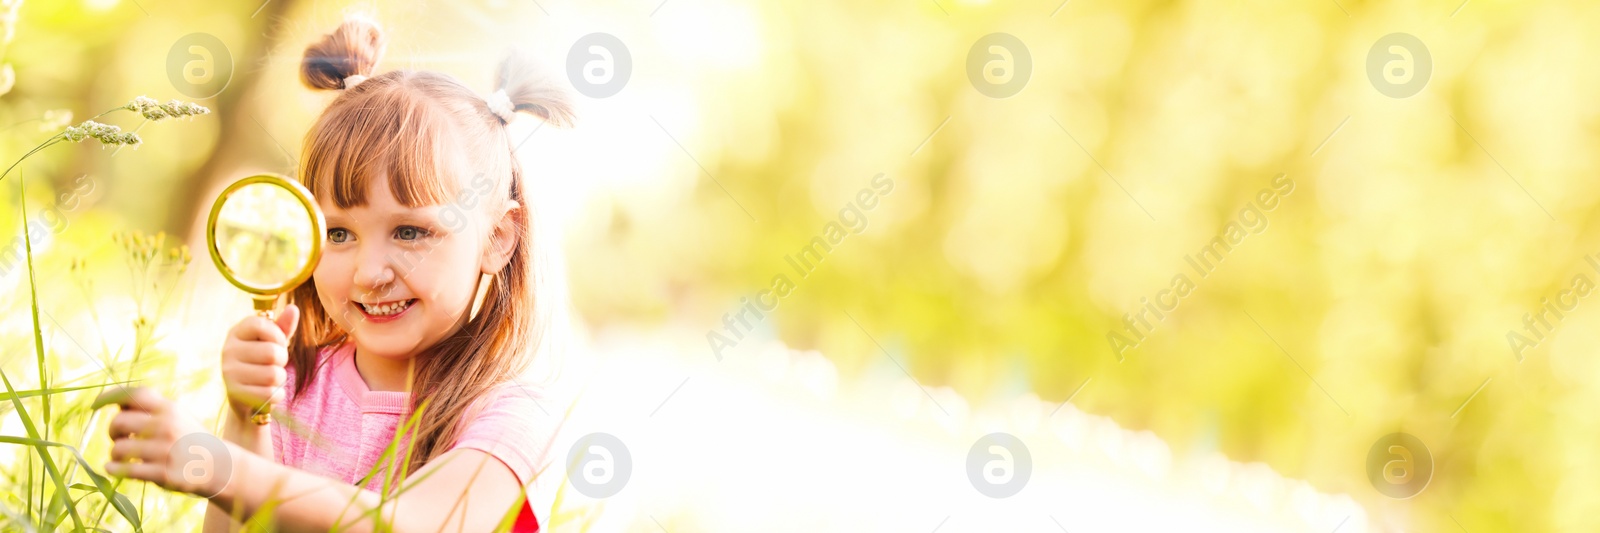 Image of Little girl exploring plant outdoors on sunny day. Banner design